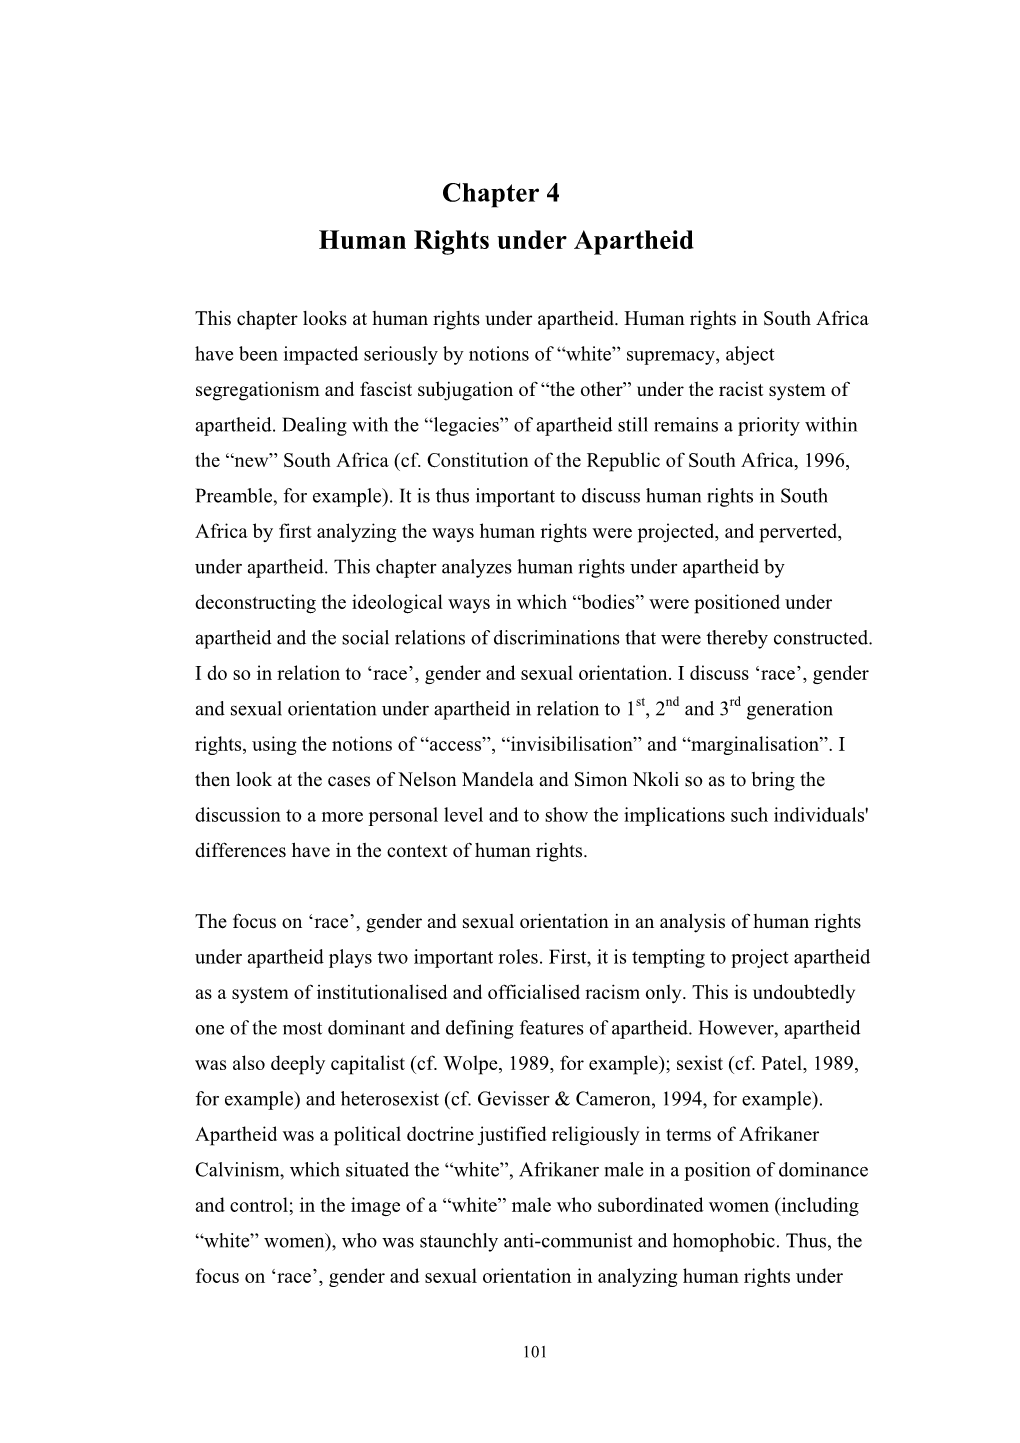 Chapter 4 Human Rights Under Apartheid